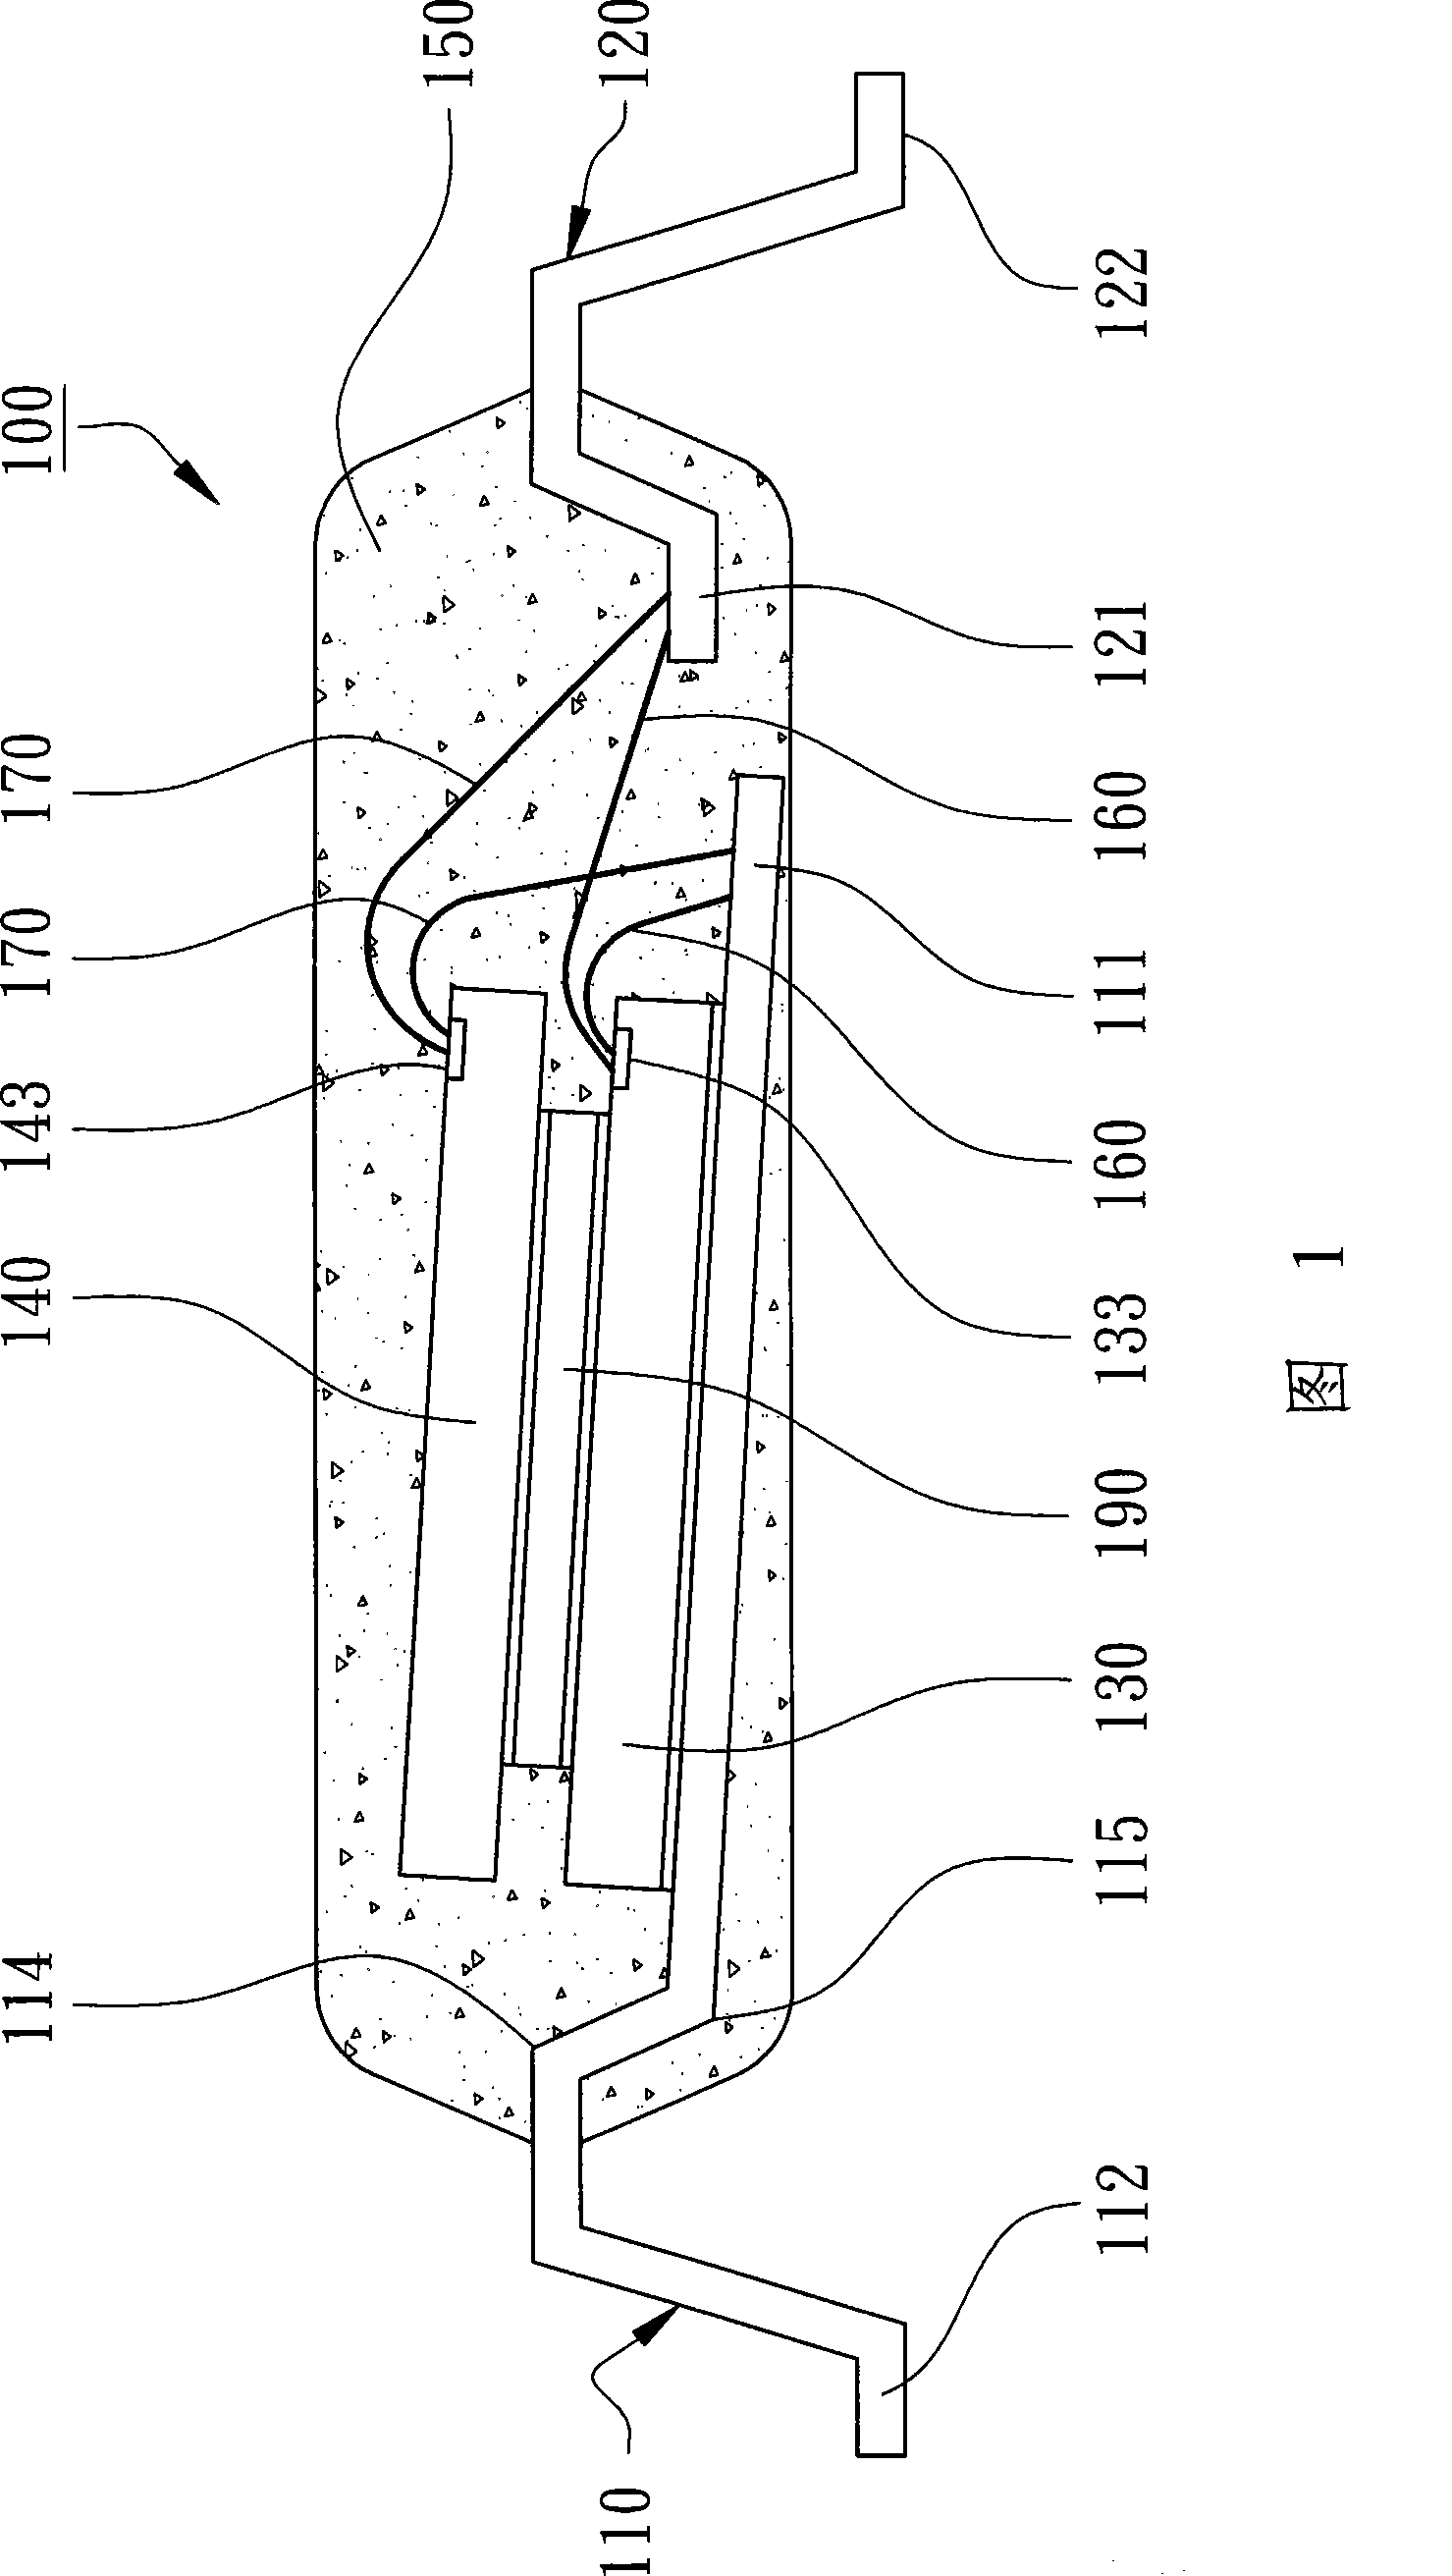 Multichip package structure capable of arranging chips on pins